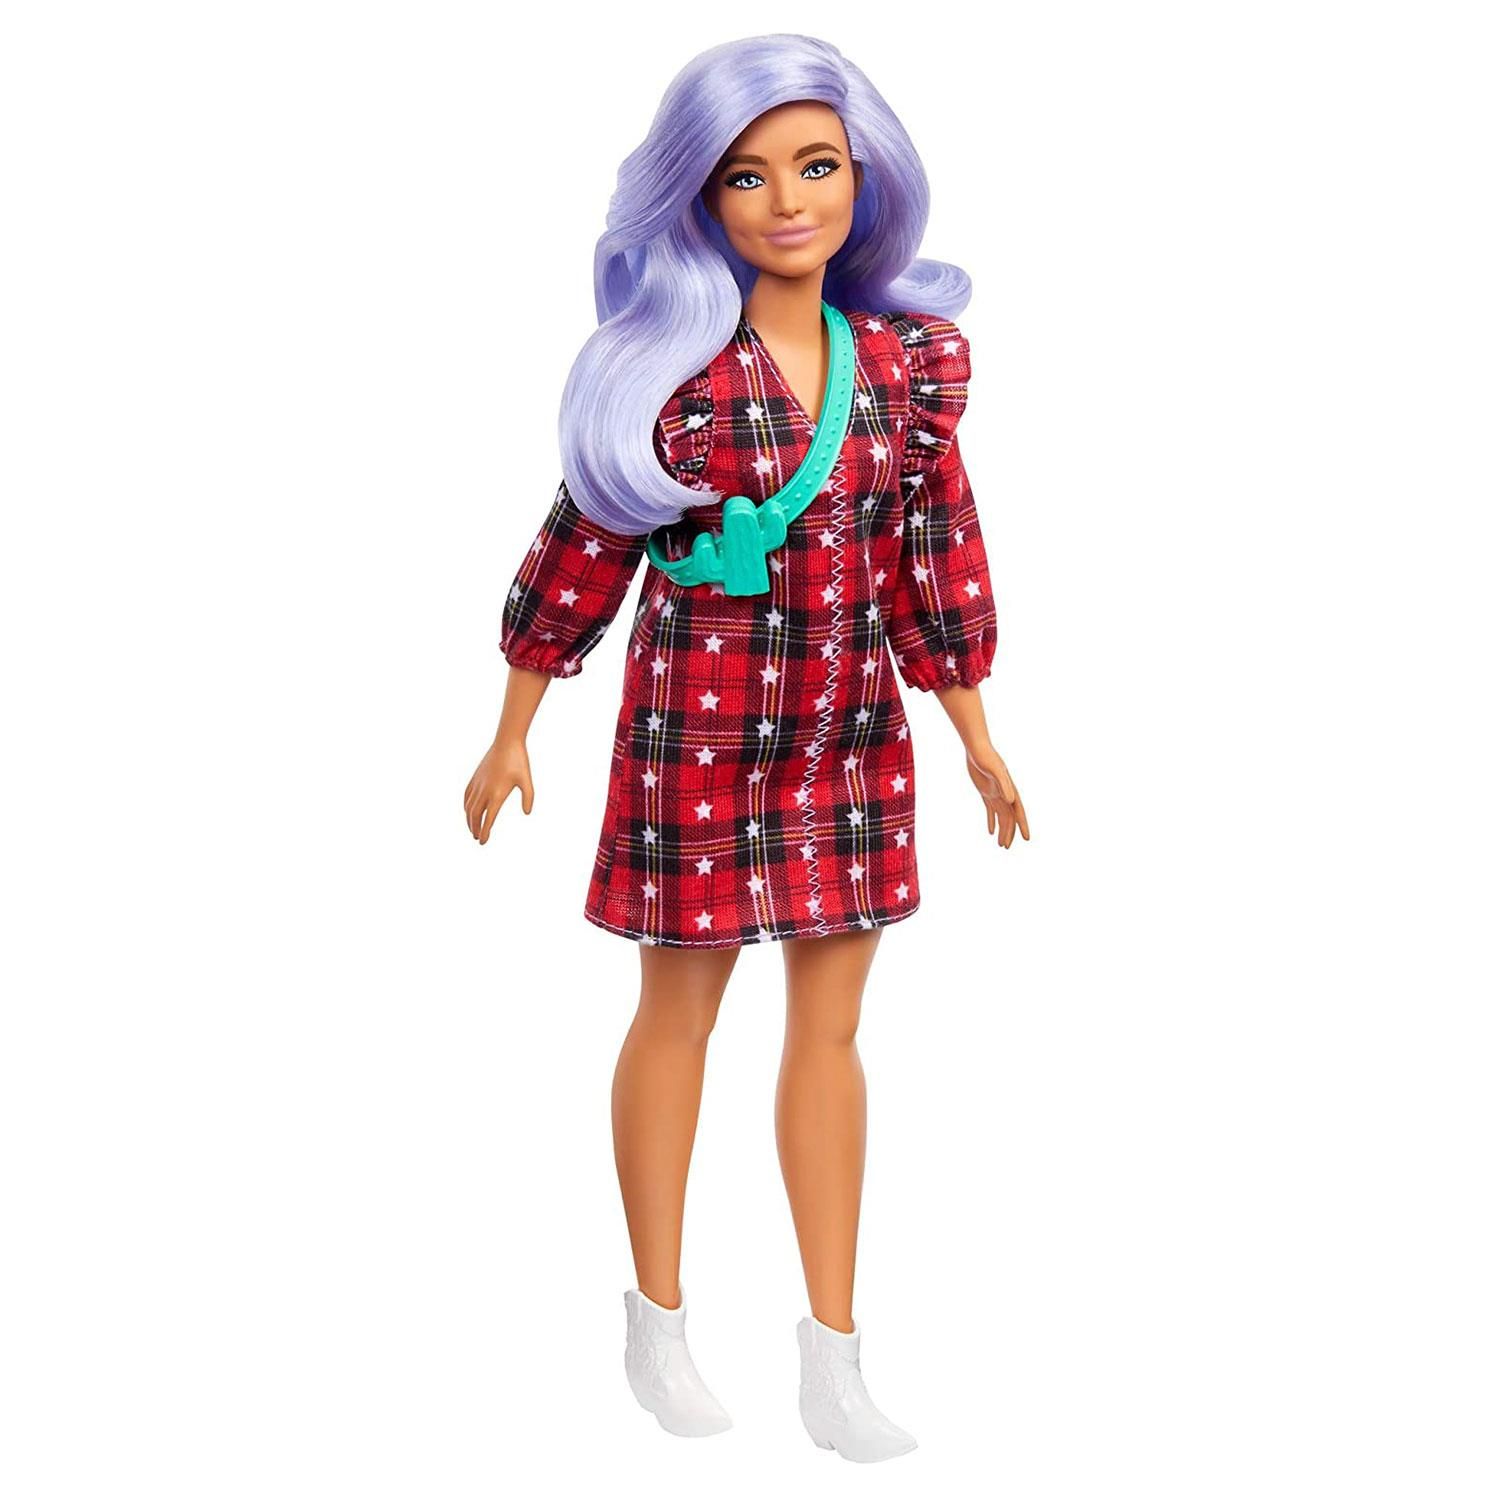 Barbie and Ken Fashionistas celebrate diversity with fashion dolls that encourage real-world storytelling and open-ended dreams! With a wide variety of skin tones, eye colors, hair colors and textures, body types, and fashions, the dolls are designed to reflect the world kids see today - and their attention-grabbing outfits help them stand out with personalities that pop! Use the reusable vinyl package to fill, carry and customize - store Barbie fashions and accessories, carry a doll anywhere, even decorate it and use it for self-expression! Kids can collect Barbie dolls and accessories for infinite ways to play out stories, express their own style, and discover that fashion is fun for everyone! Includes Barbie Fashionistas doll wearing fashions and accessories. Each is sold separately, subject to availability. Barbie dolls cannot stand alone. Flat shoes fit dolls with articulated ankles or flat feet. Colors and decorations may vary.